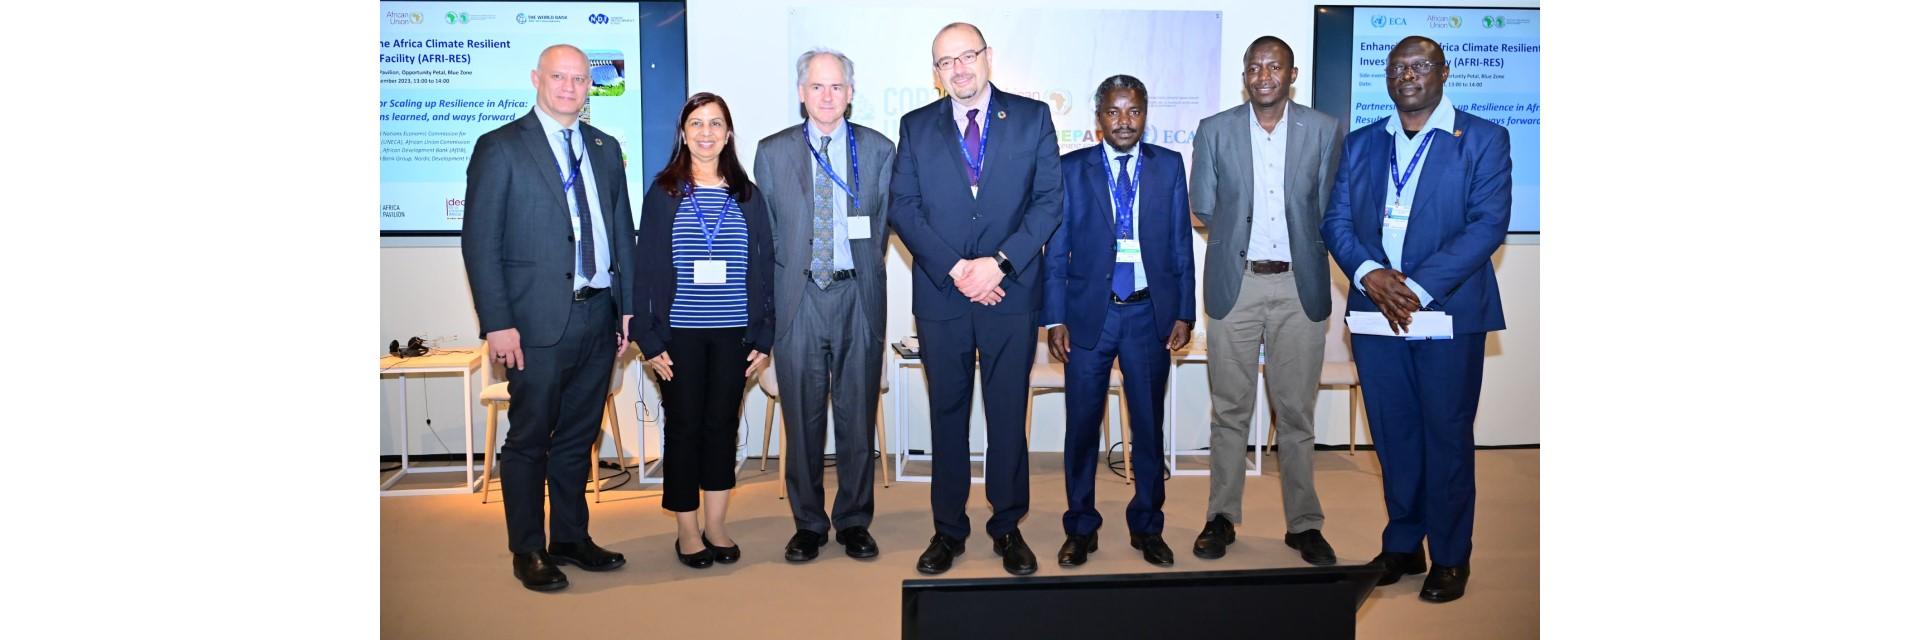 Building partnerships and networks key for the next phase of African climate resilient investment facility